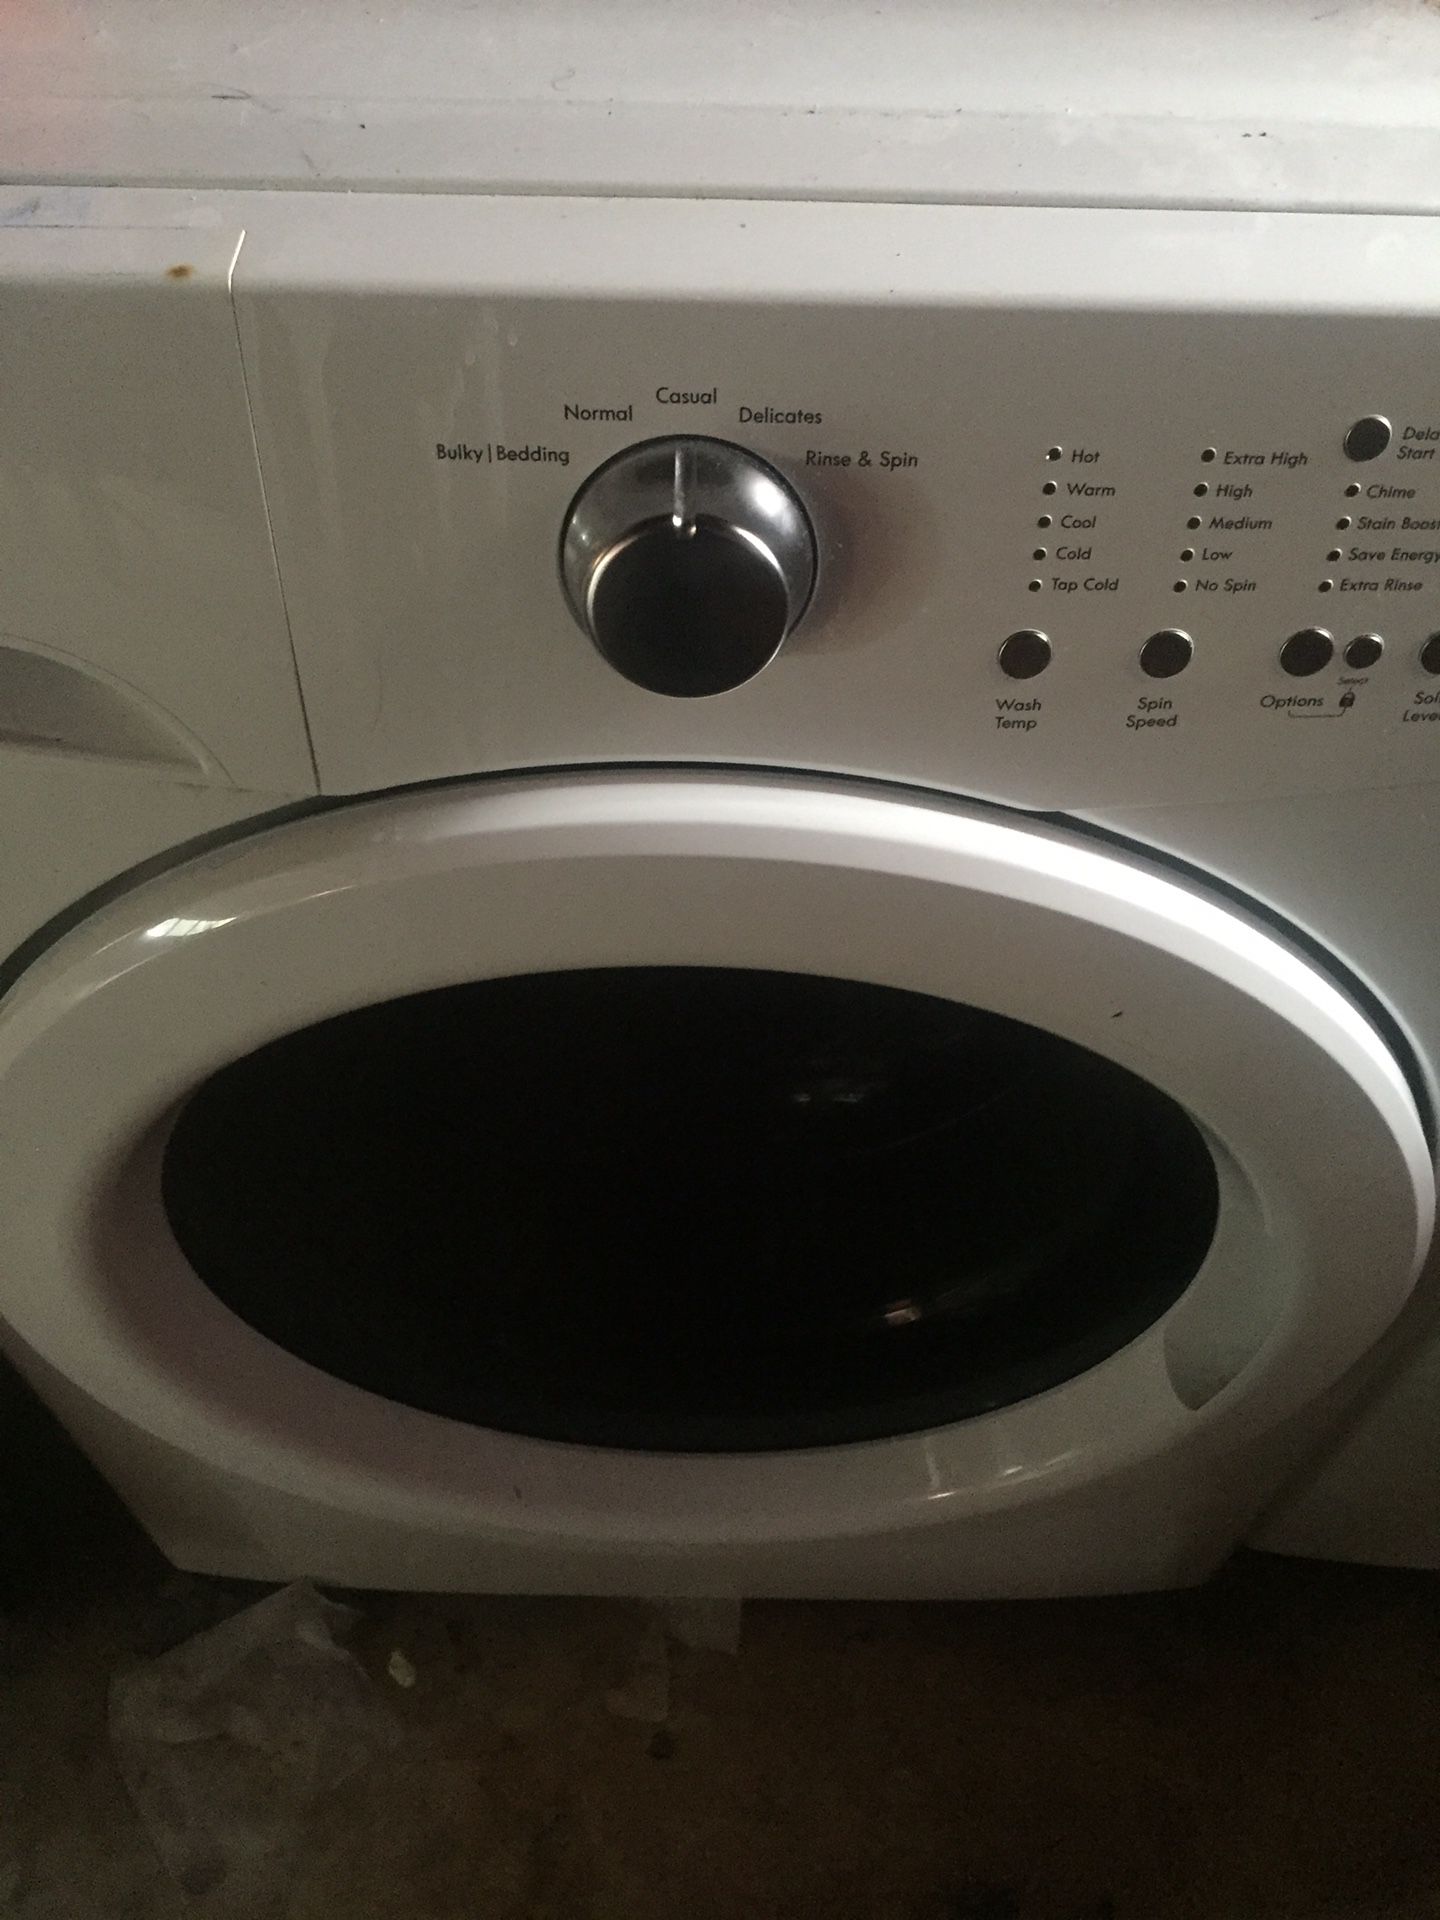 WHIRLPOOL WASHING MACHINE AND DRYER AND STAINLESS STEEL DISHWASHER AND STOVE SAMSUNG AND MICROWAVE ALSO 2007 VOLVO SEMI TRUCK CLEAR TITLE $4500